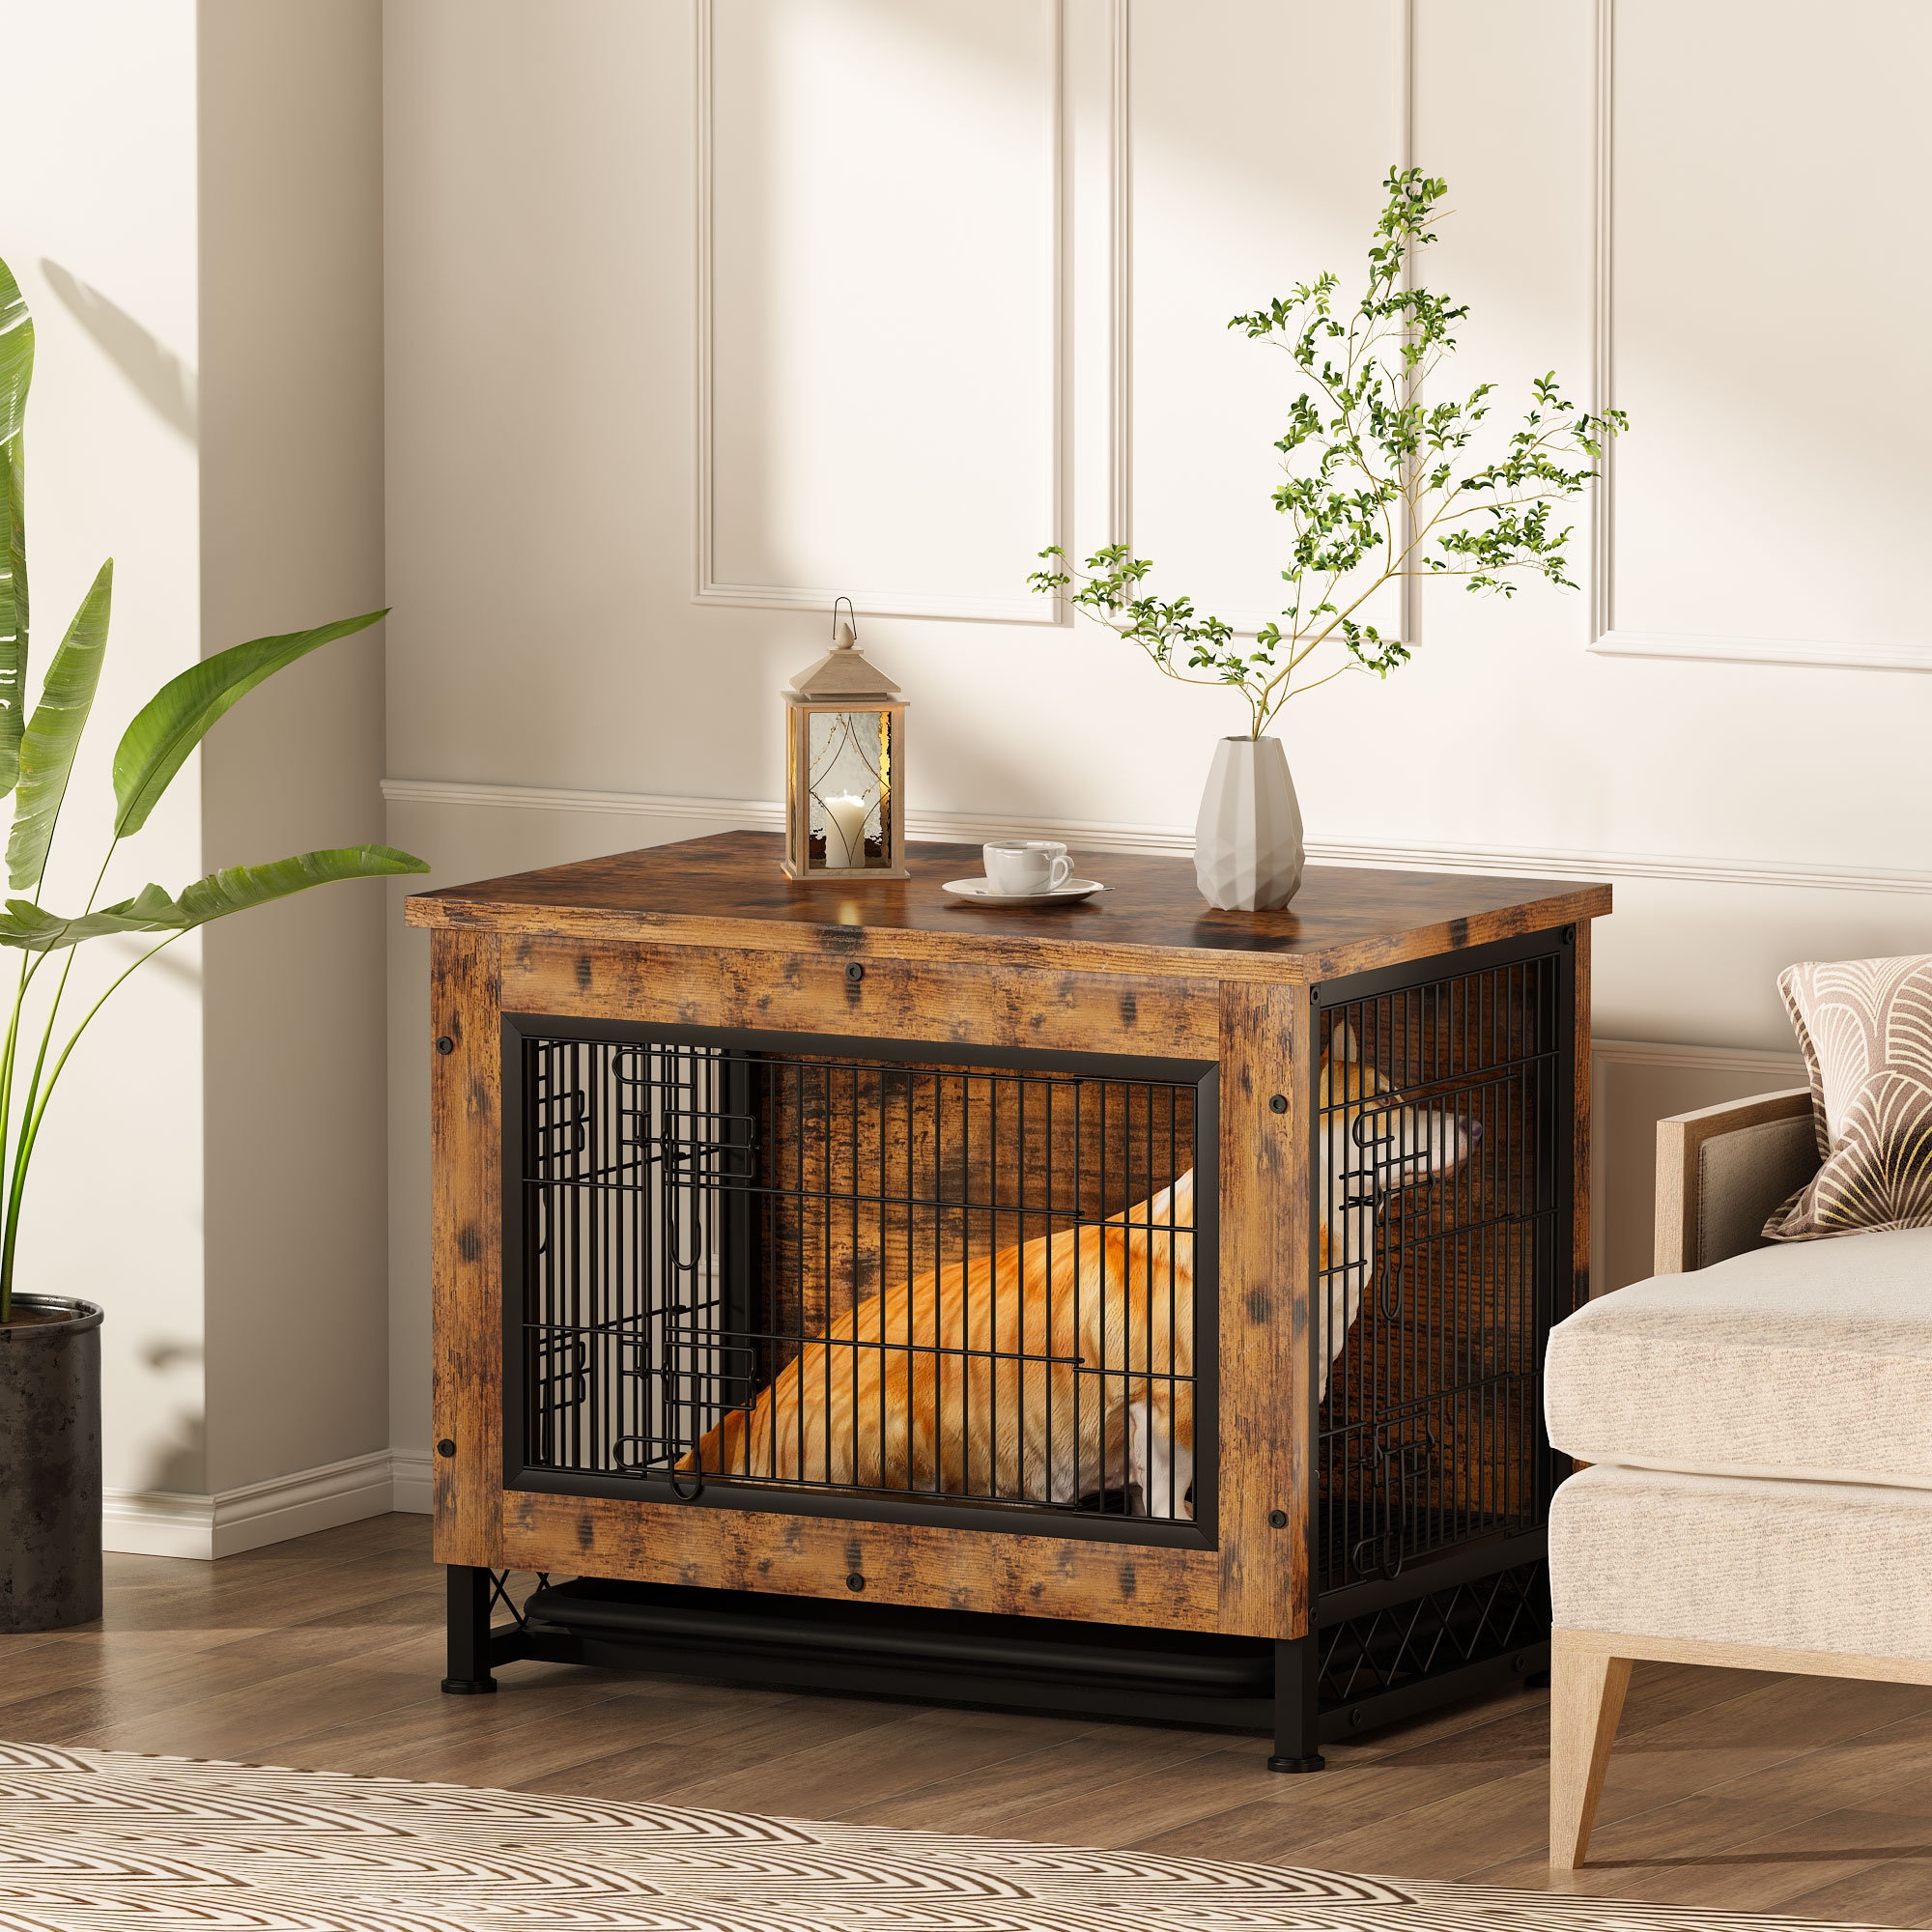 https://visualhunt.com/photos/23/industrial-style-rustic-brown-wooden-dog-kennel-with-three-doors-indoor-pet-furniture-dog-crate-end-table.jpg